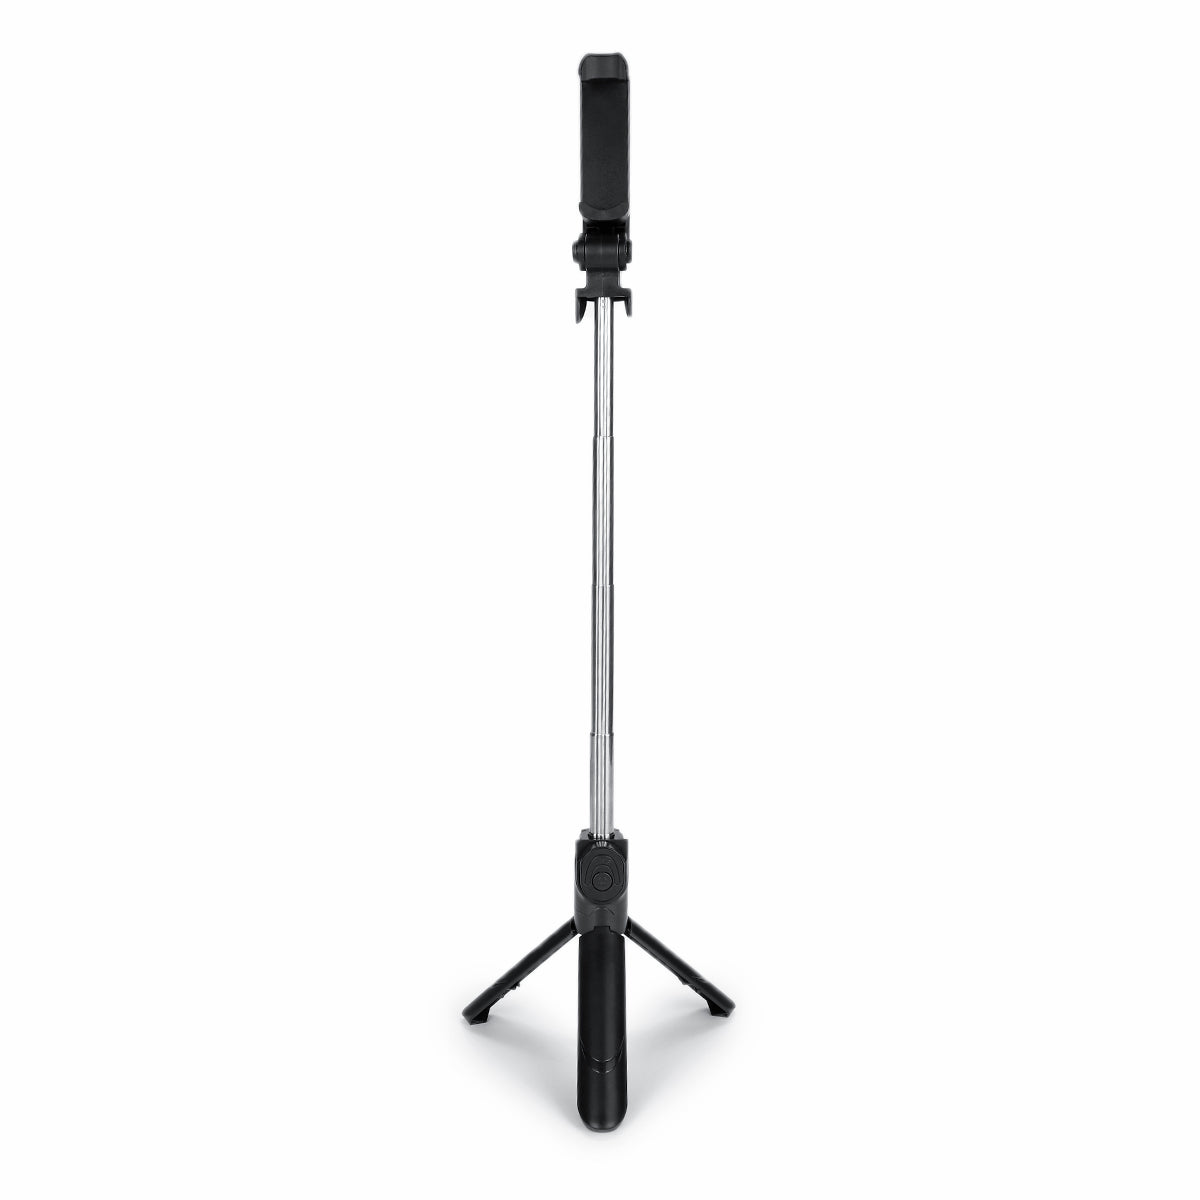 bluetooth Extendable Handheld Wireless Selfie Stick Tripod Remote Shutter Holder for Mobile Phone